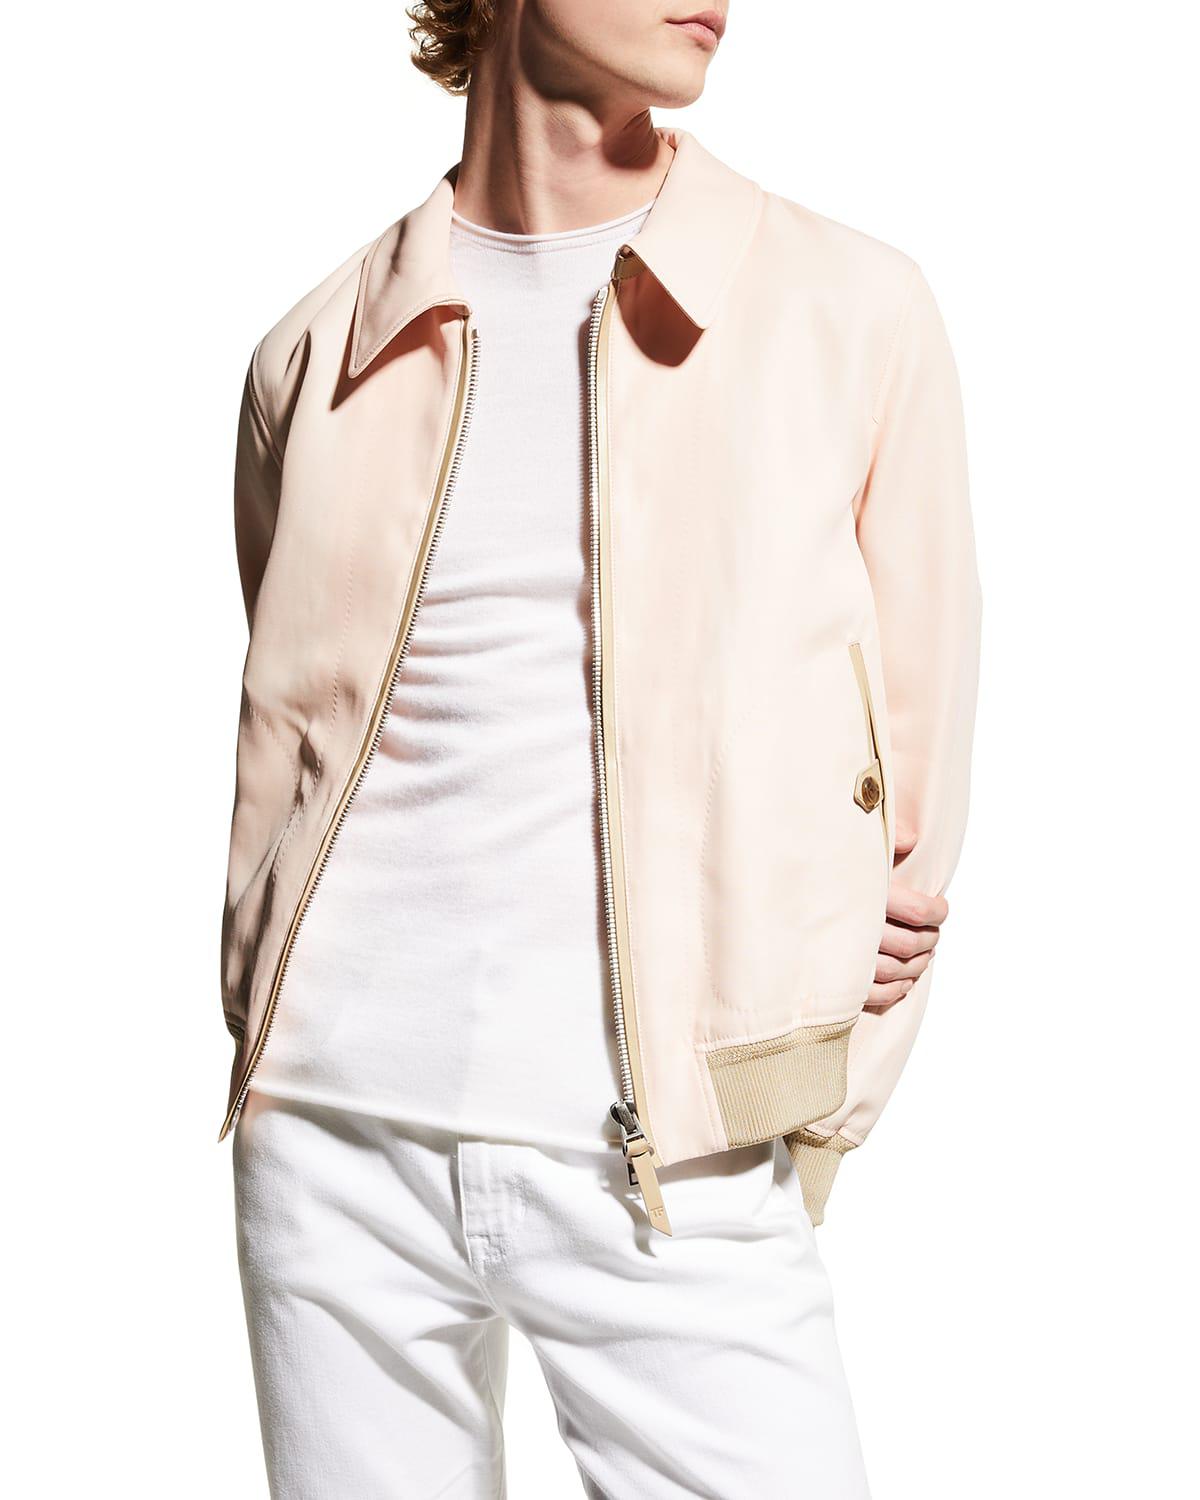 Men's Silk-Cotton Organza Chic Blouson Jacket by TOM FORD | jellibeans